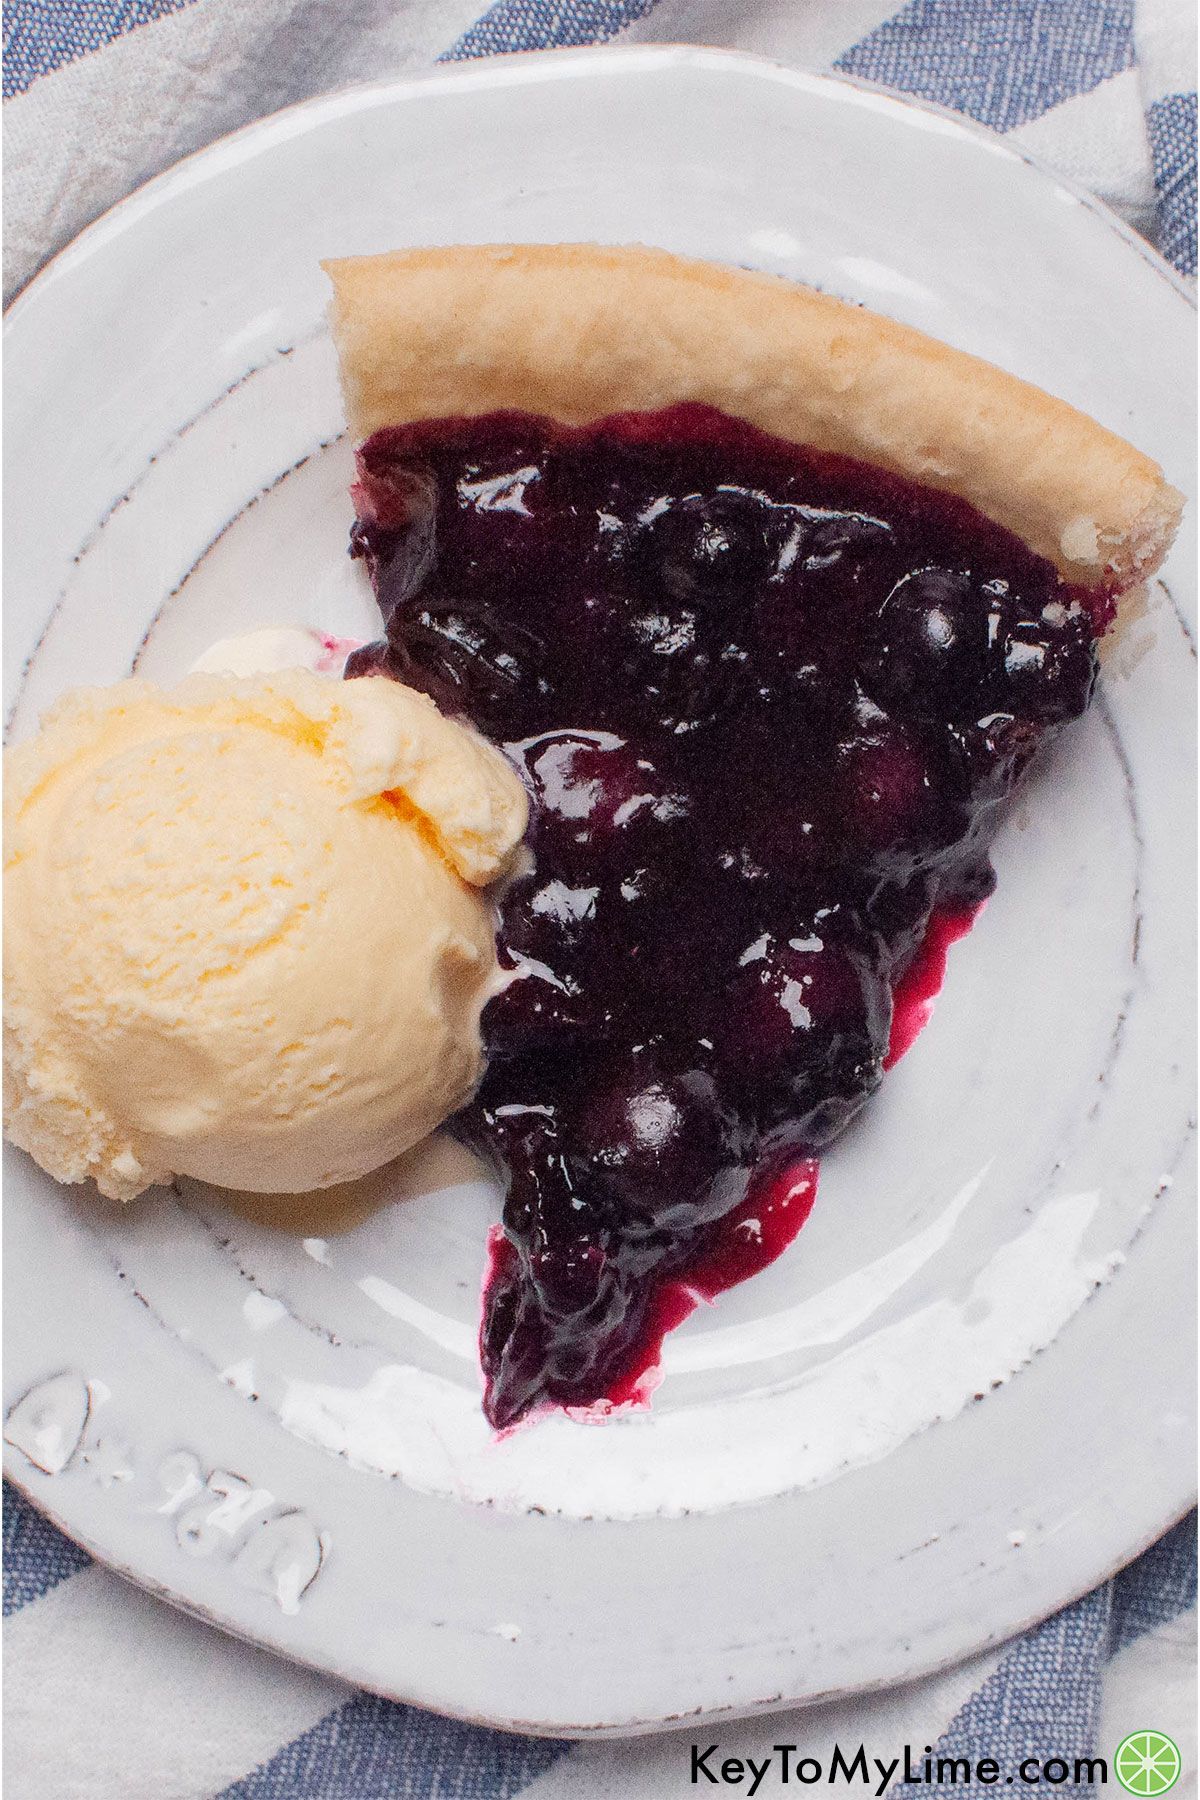 An overhead image of a serving of blueberry pie next to a scoop of vanilla ice cream on a white plate.